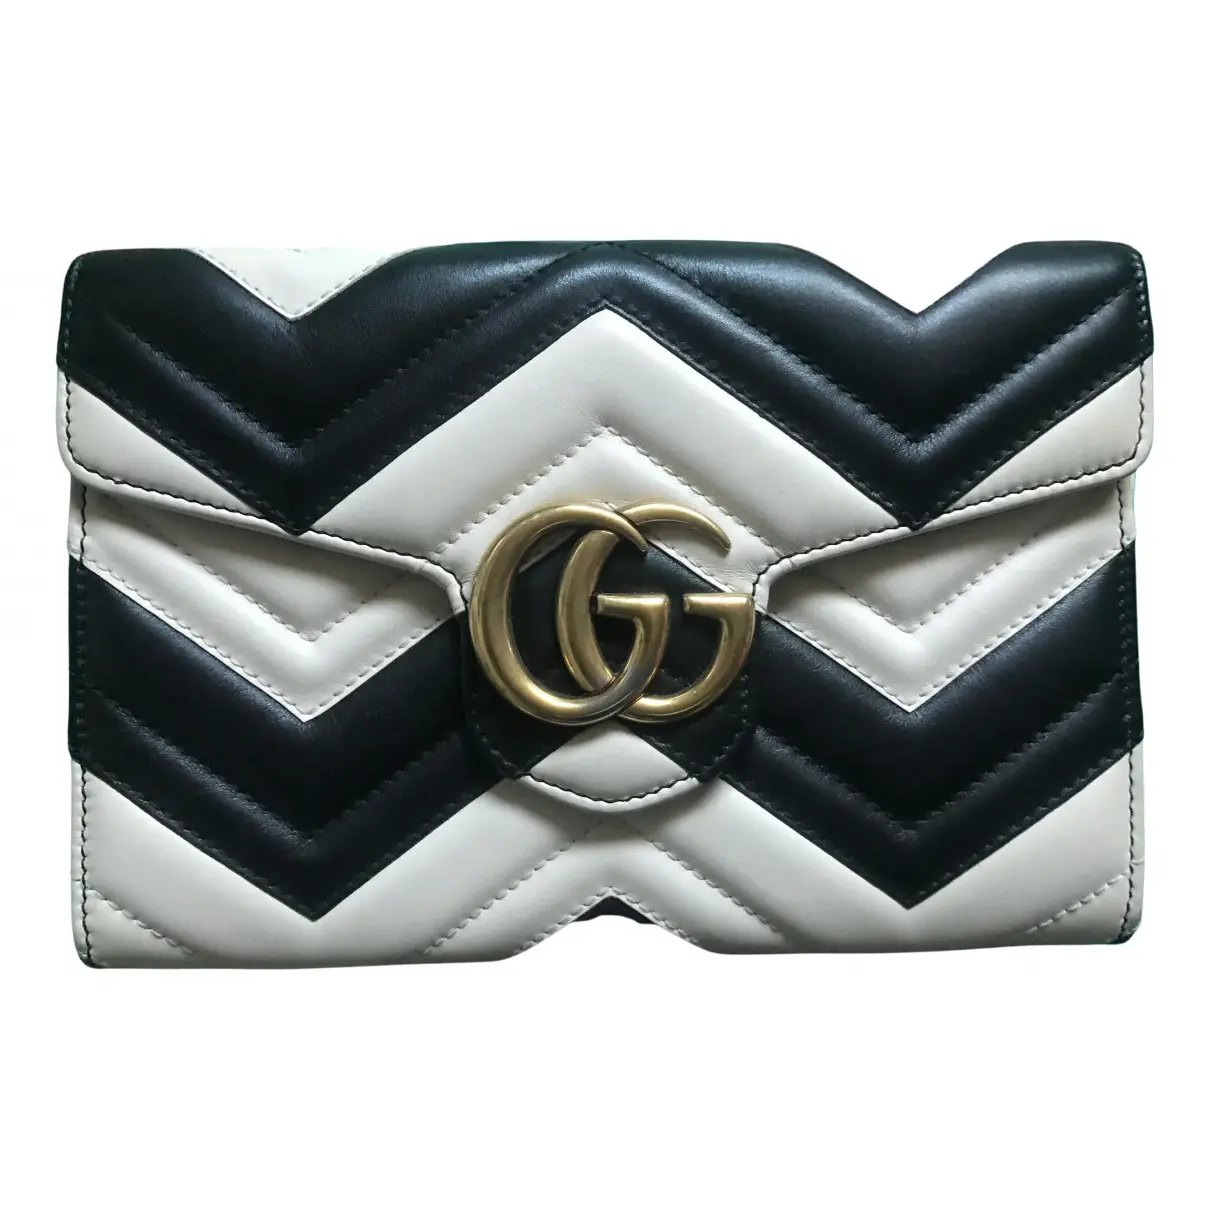 GG Marmont Chain leather crossbody bag Gucci